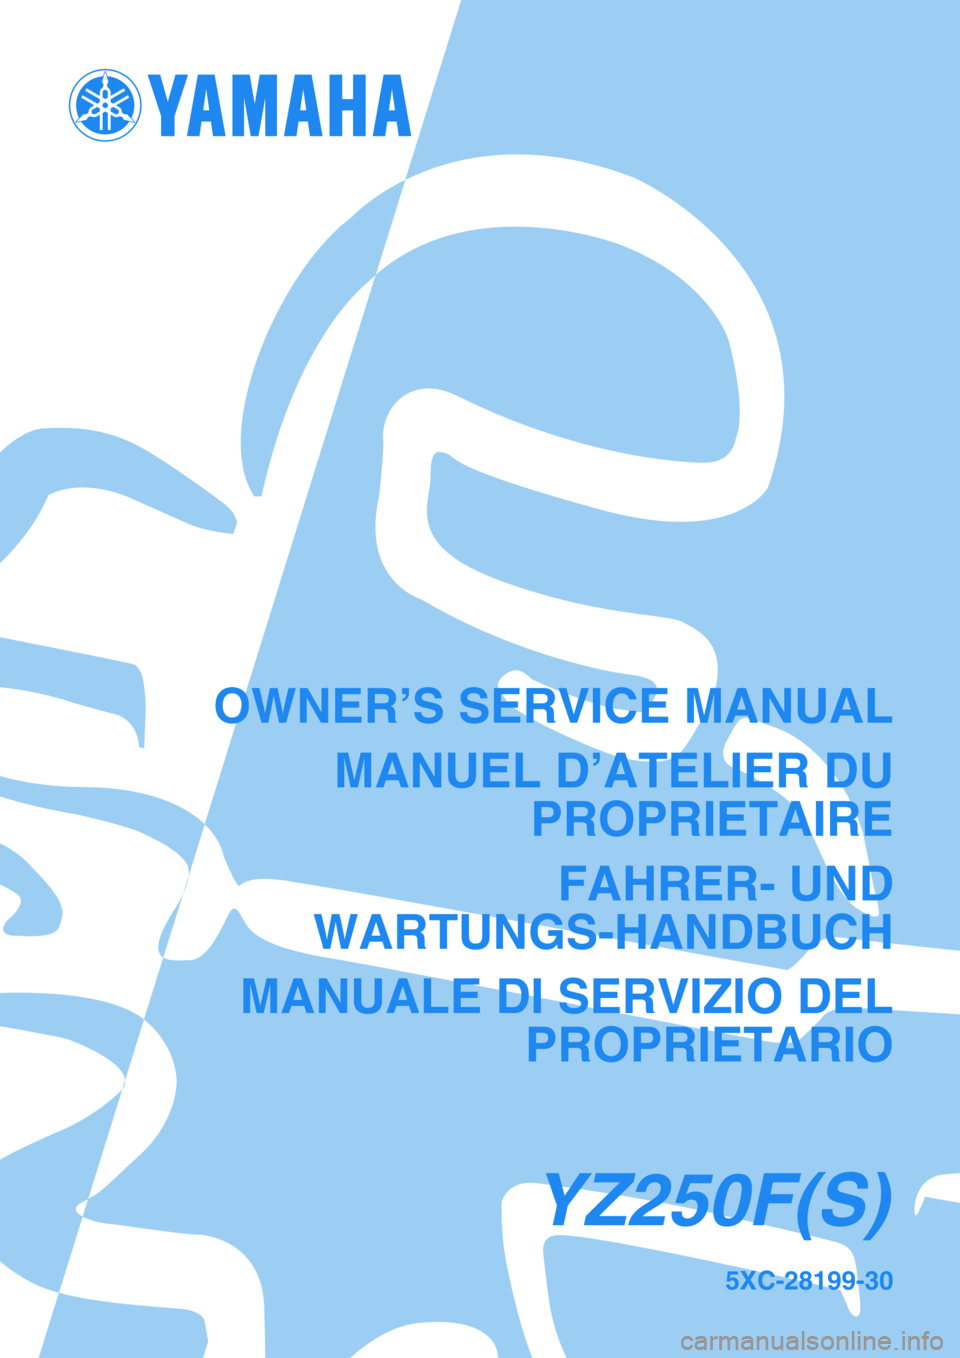 YAMAHA YZ250F 2004  Owners Manual 5XC-28199-30
YZ250F(S)
OWNER’S SERVICE MANUAL
MANUEL D’ATELIER DU
PROPRIETAIRE
FAHRER- UND
WARTUNGS-HANDBUCH
MANUALE DI SERVIZIO DEL
PROPRIETARIO 